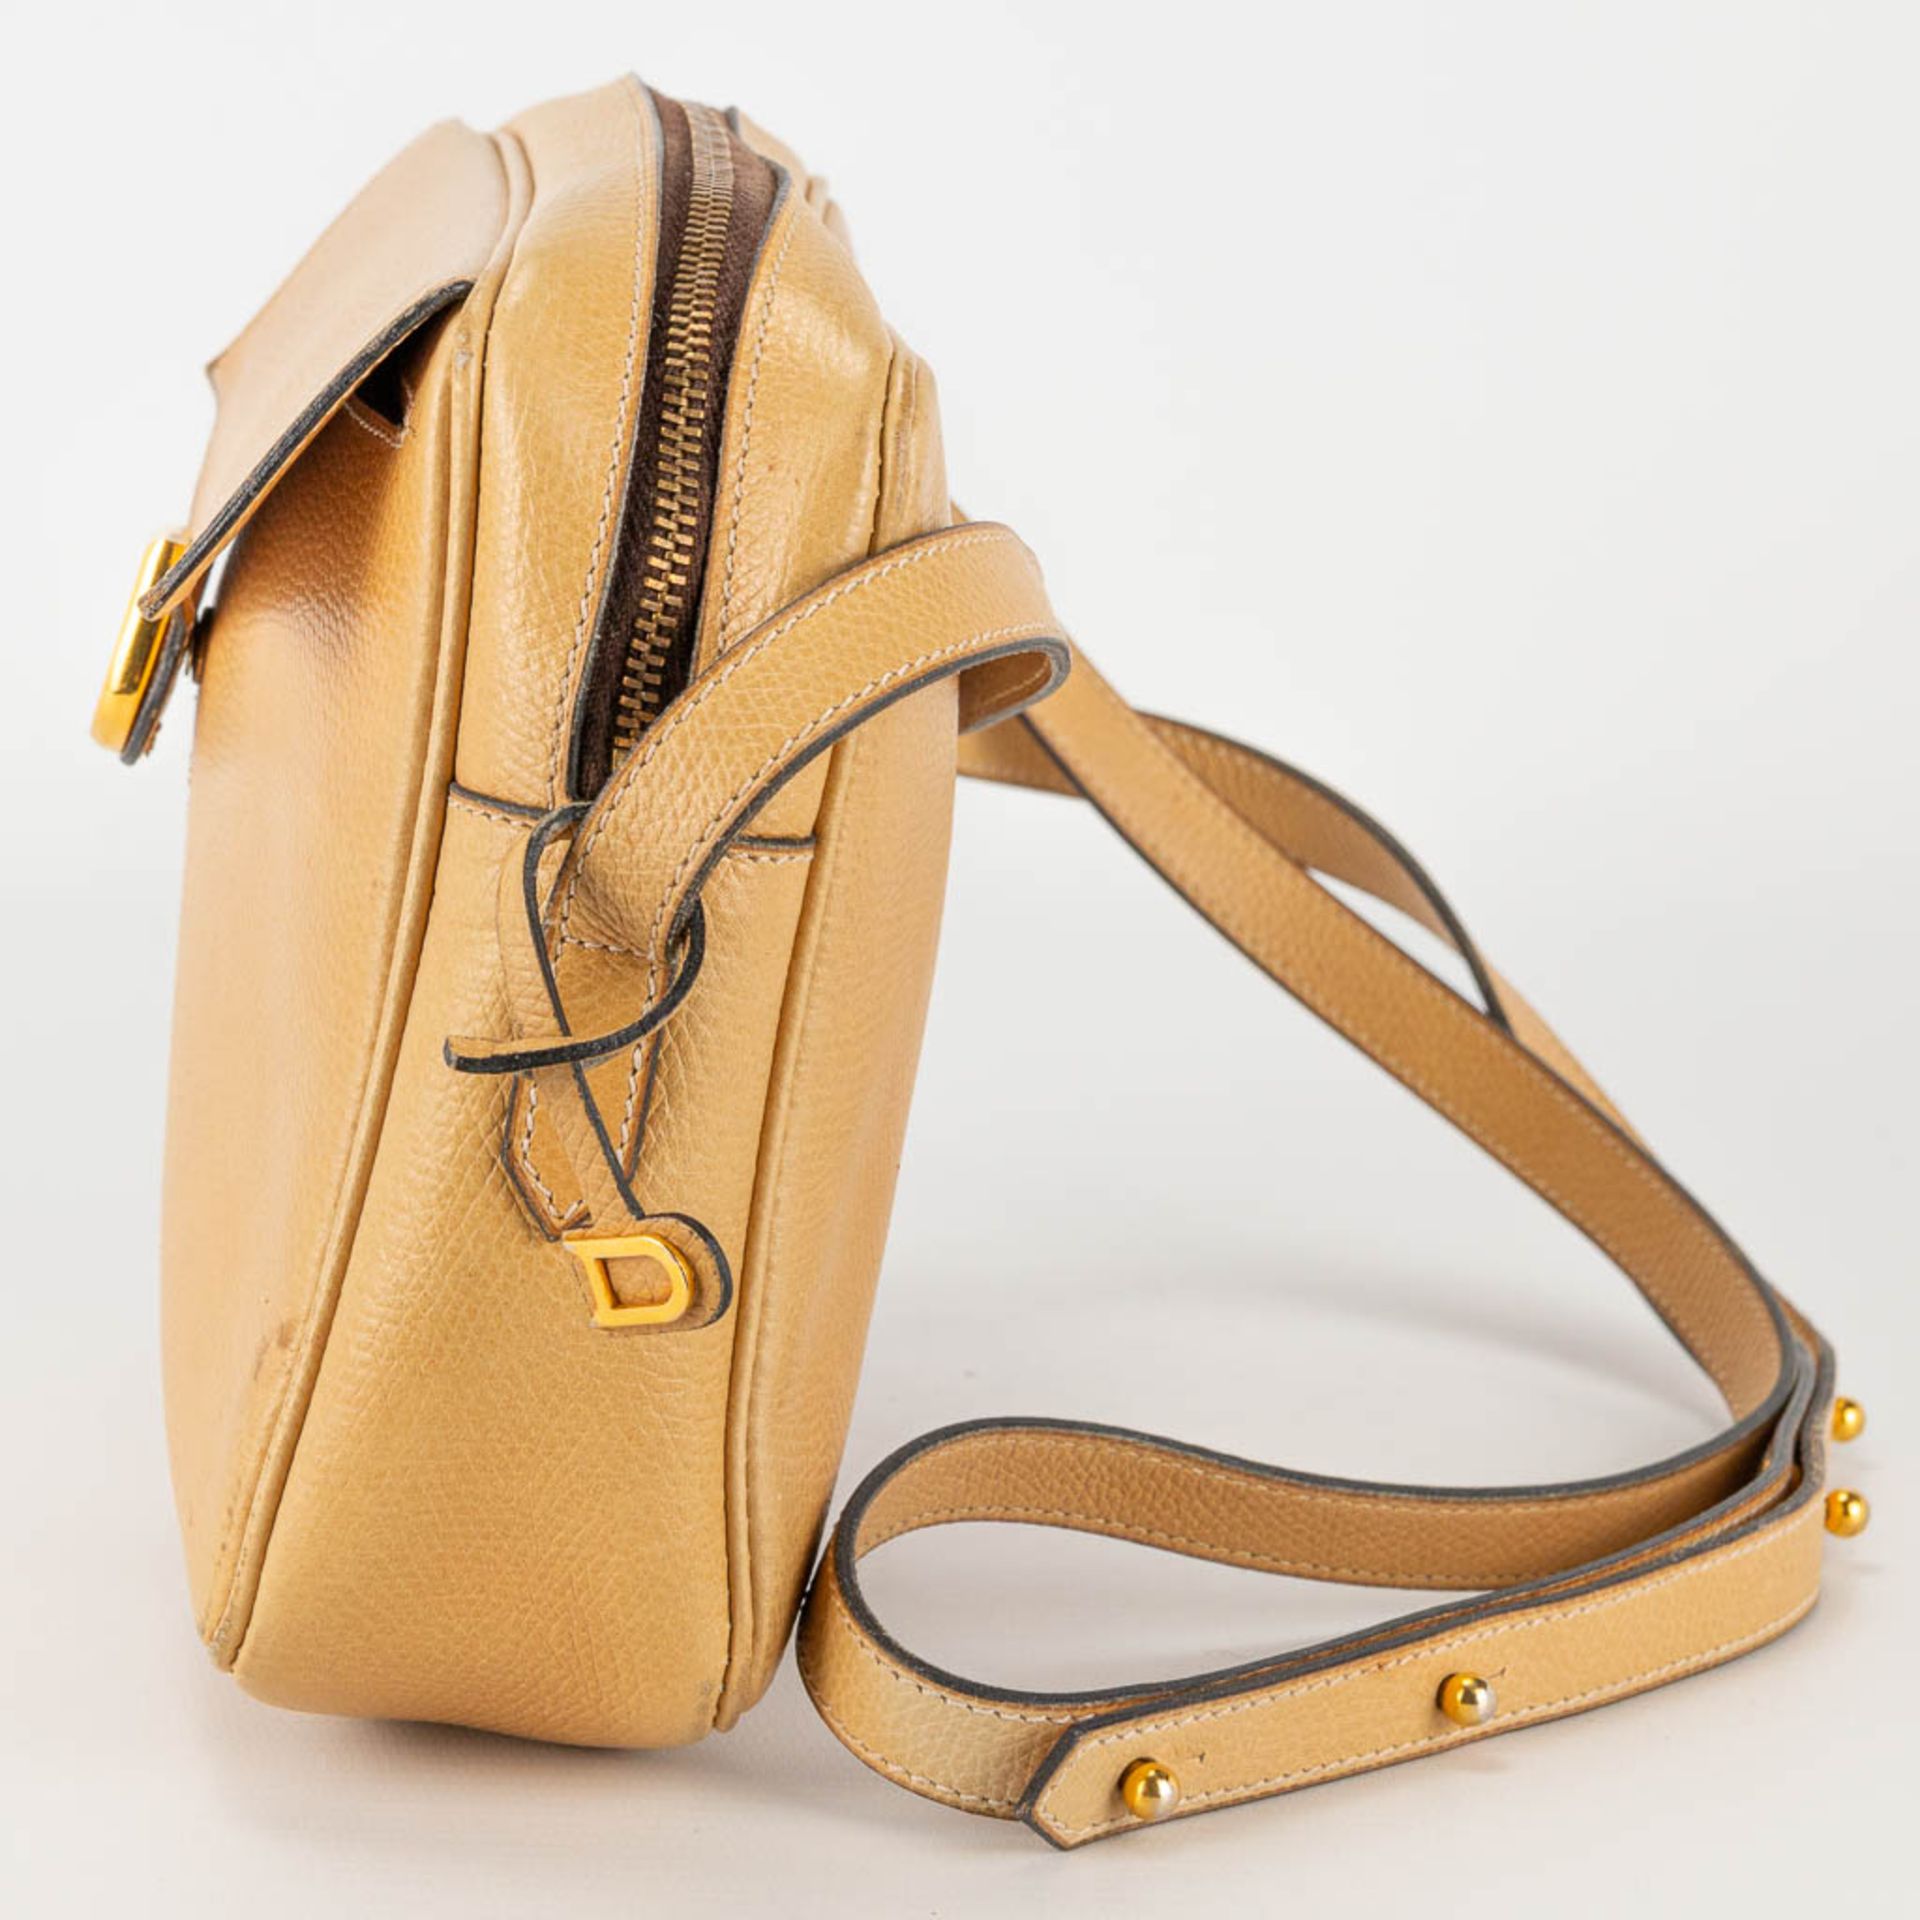 A purse made of brown leather and marked Delvaux. - Image 10 of 14